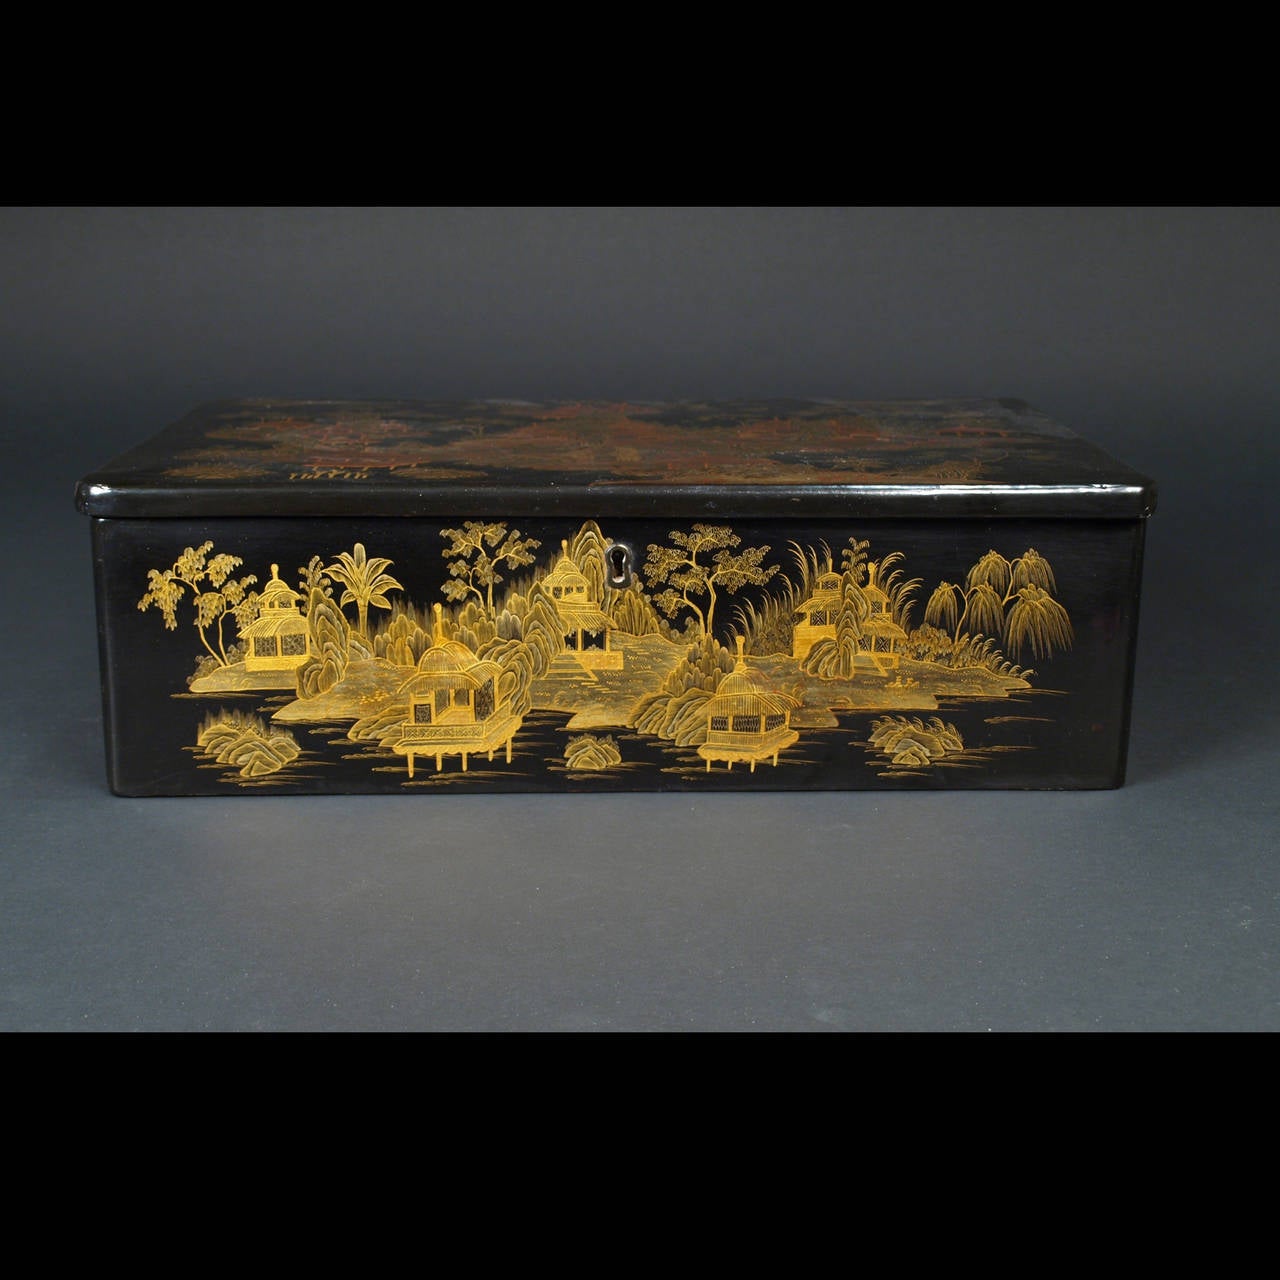 This Chinese export black and gilt lacquer box and cover, of oblong form is decorated in different tones of gold with landscapes showing buildings on foliage grounds, the interior has an inner tray with fitted compartments and various bone sewing